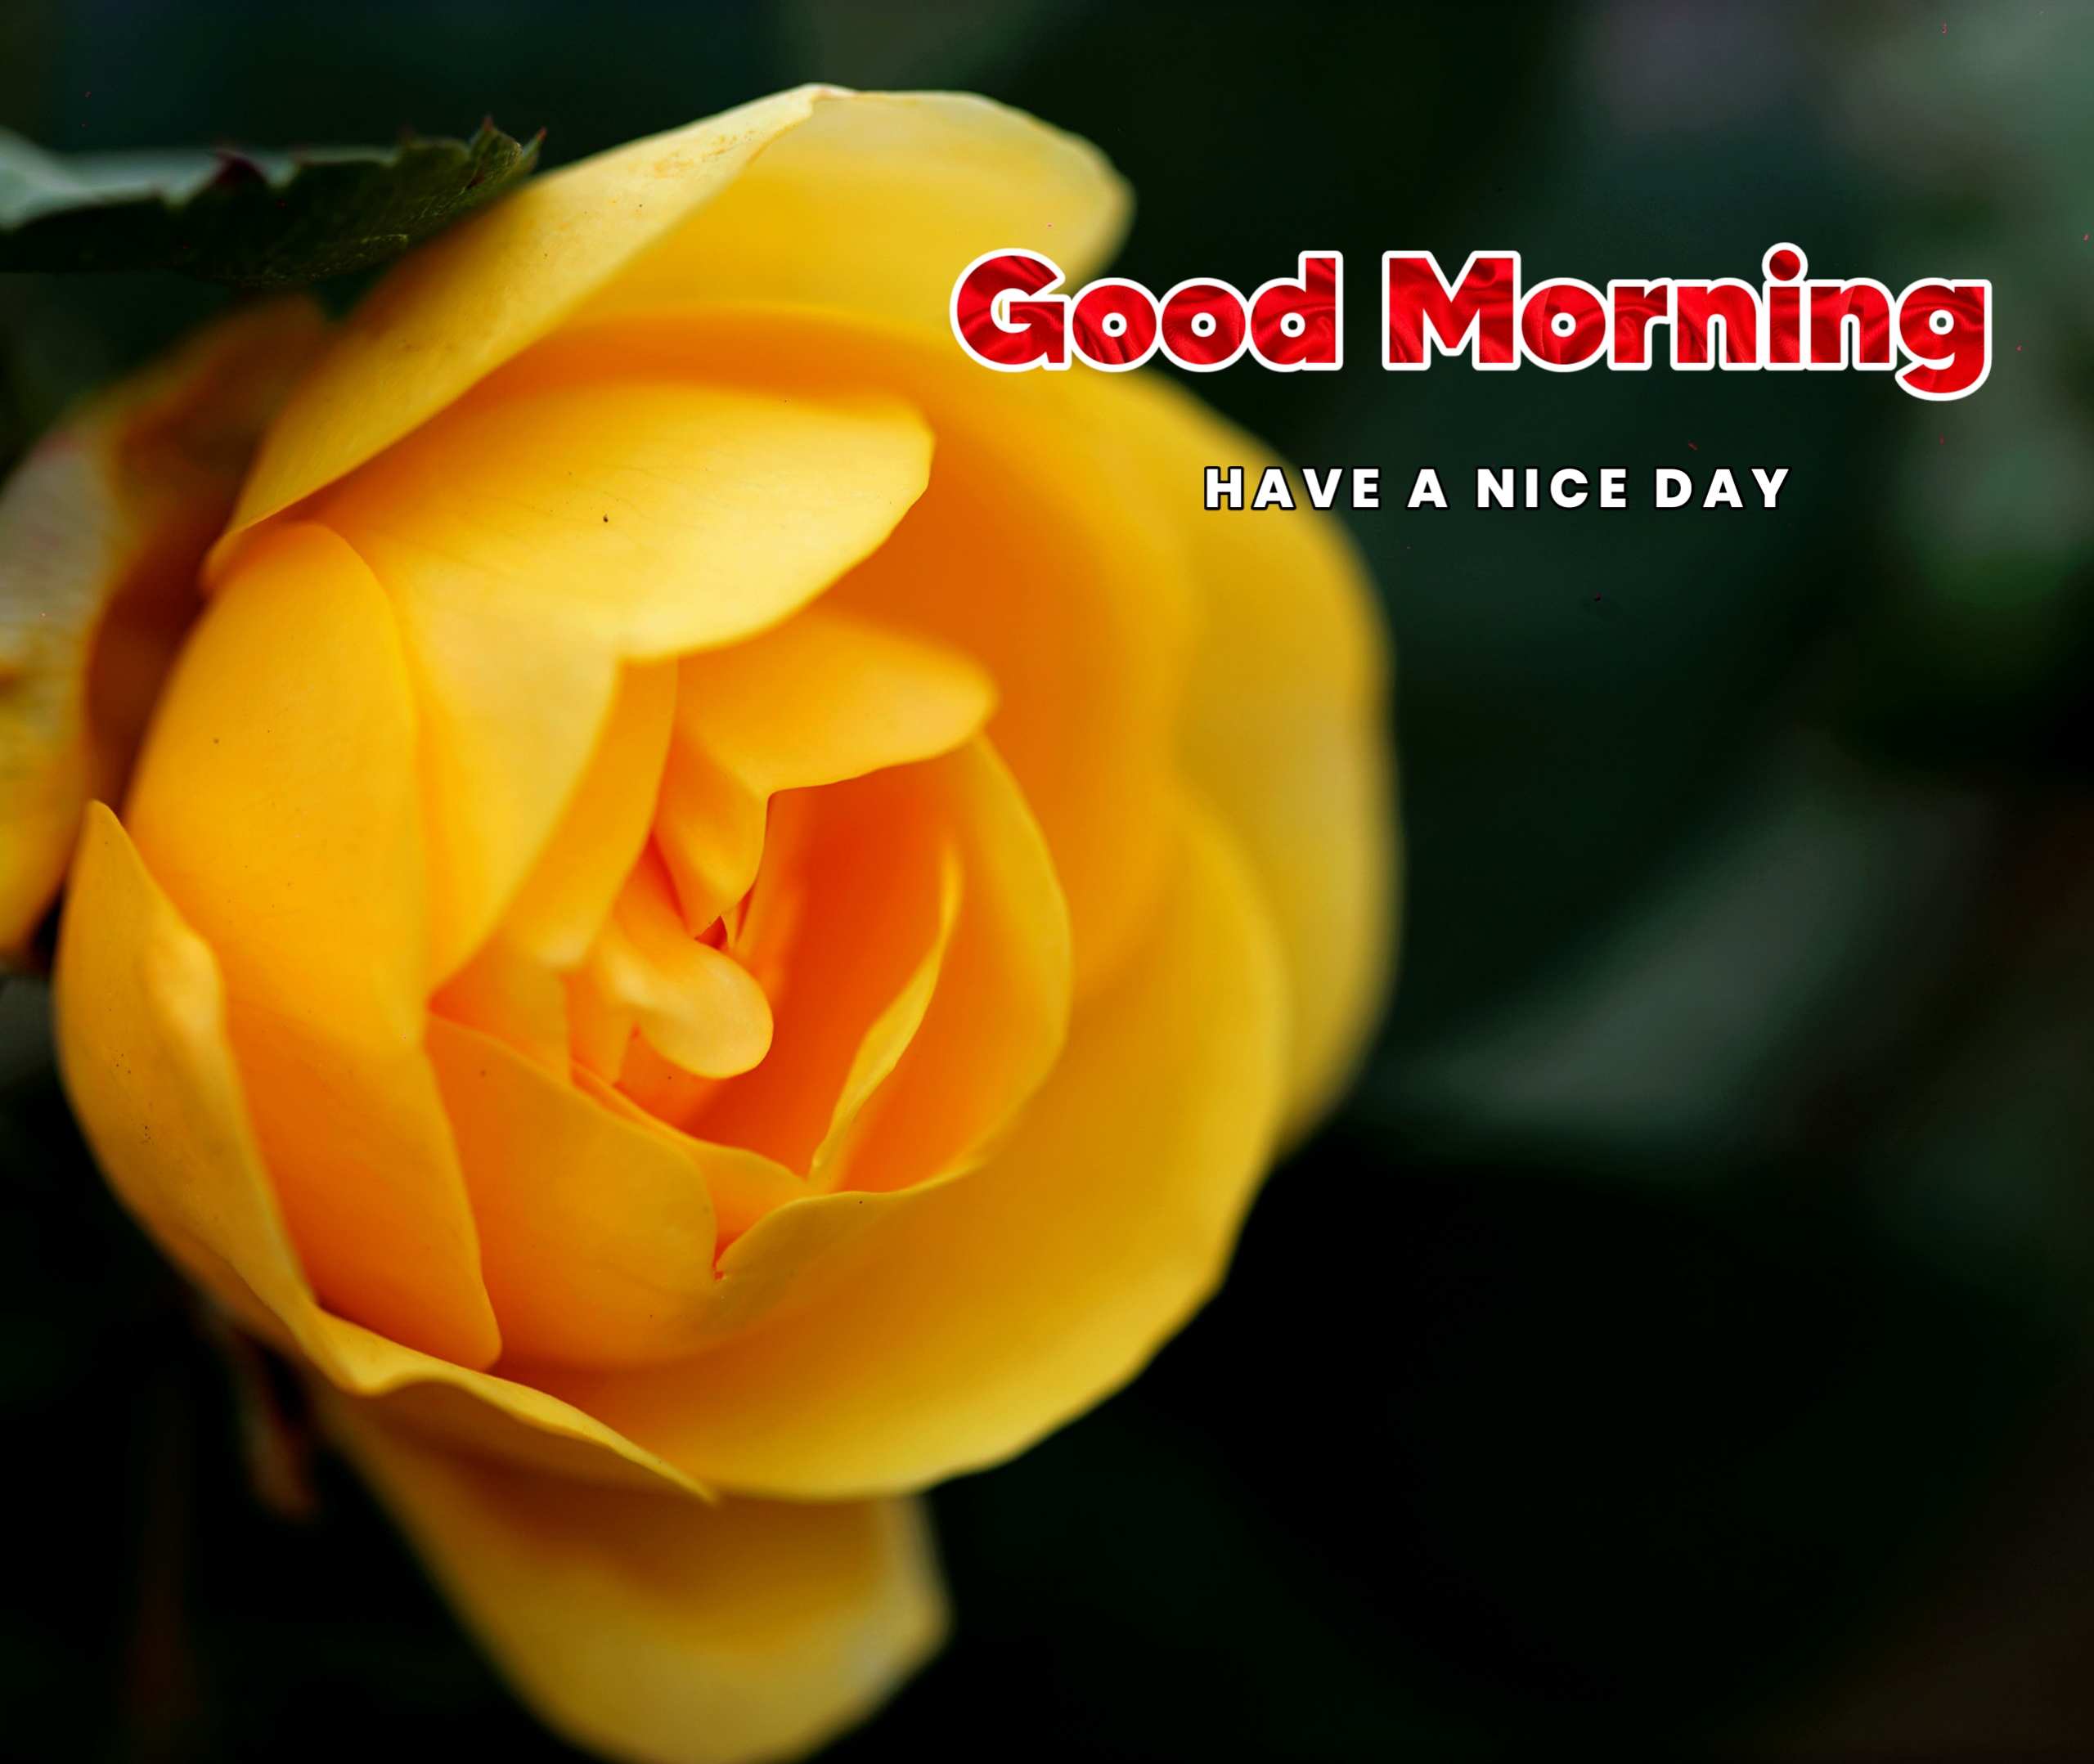 Good Morning Image With Yellow Flowers 